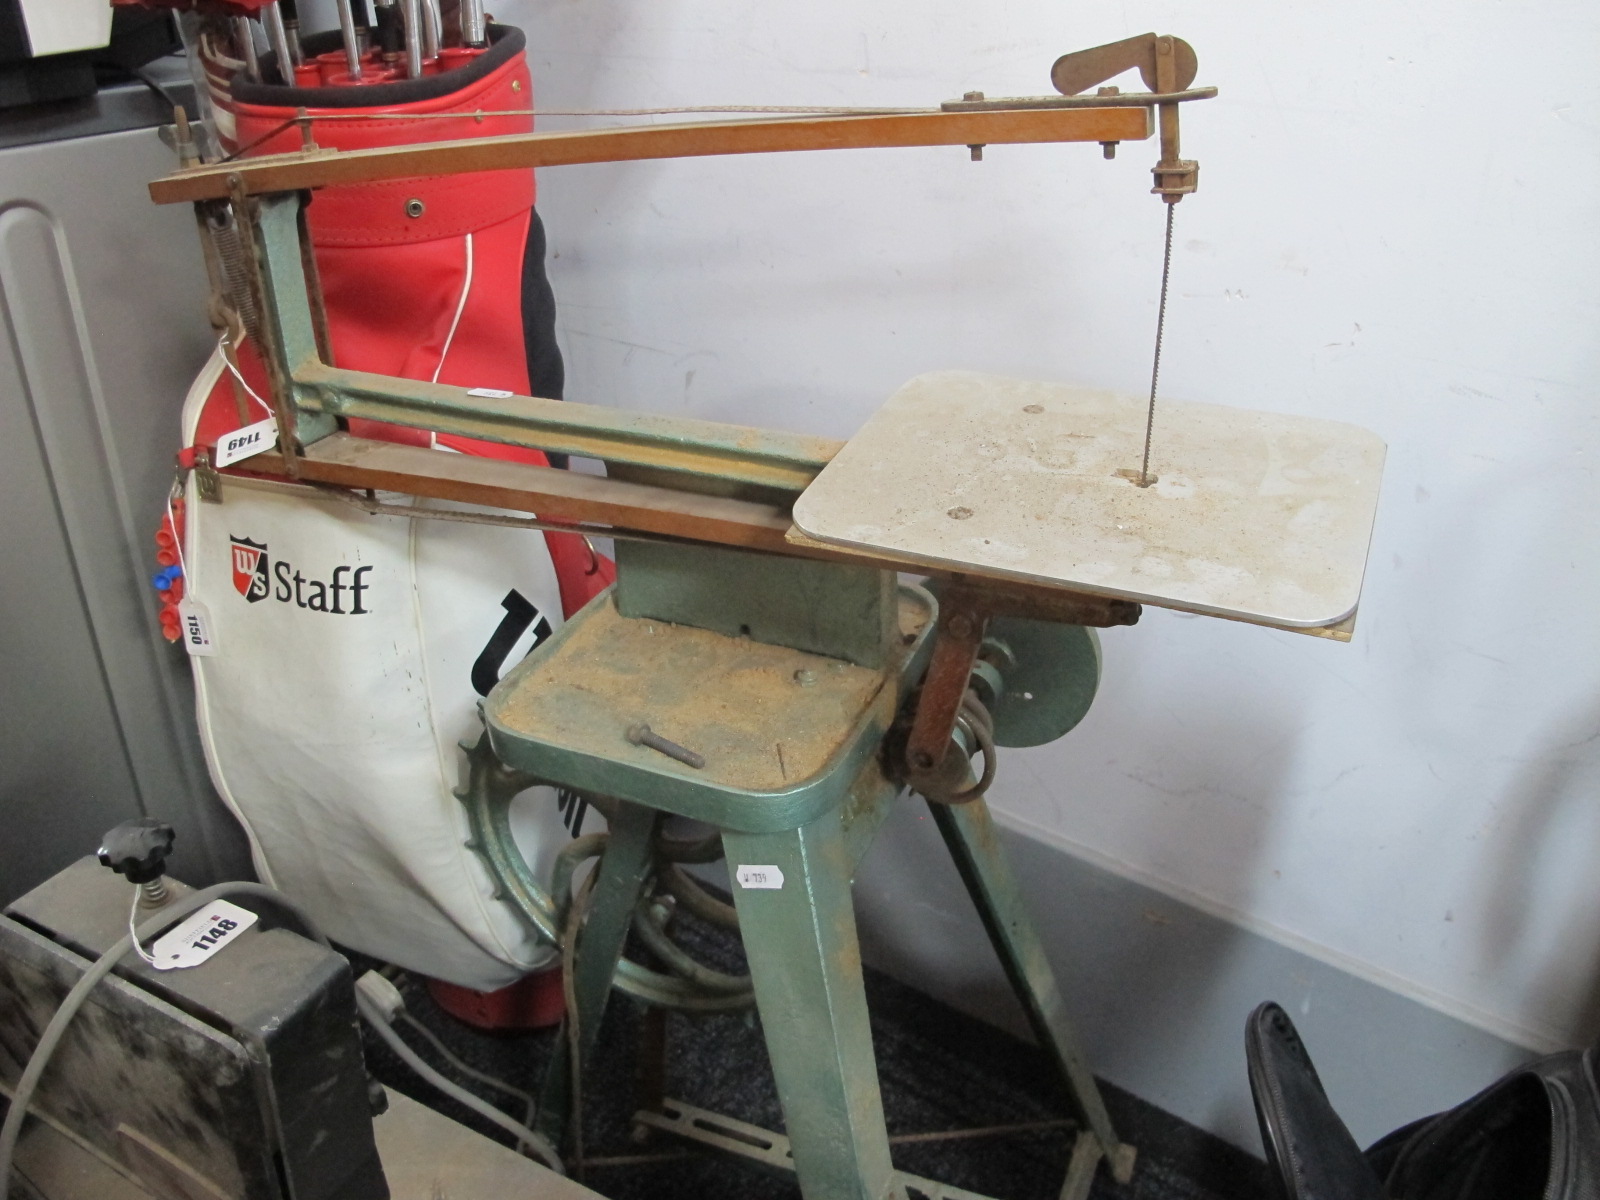 Hobbies Triumph Treadle Fret Saw - untested sold for parts only.